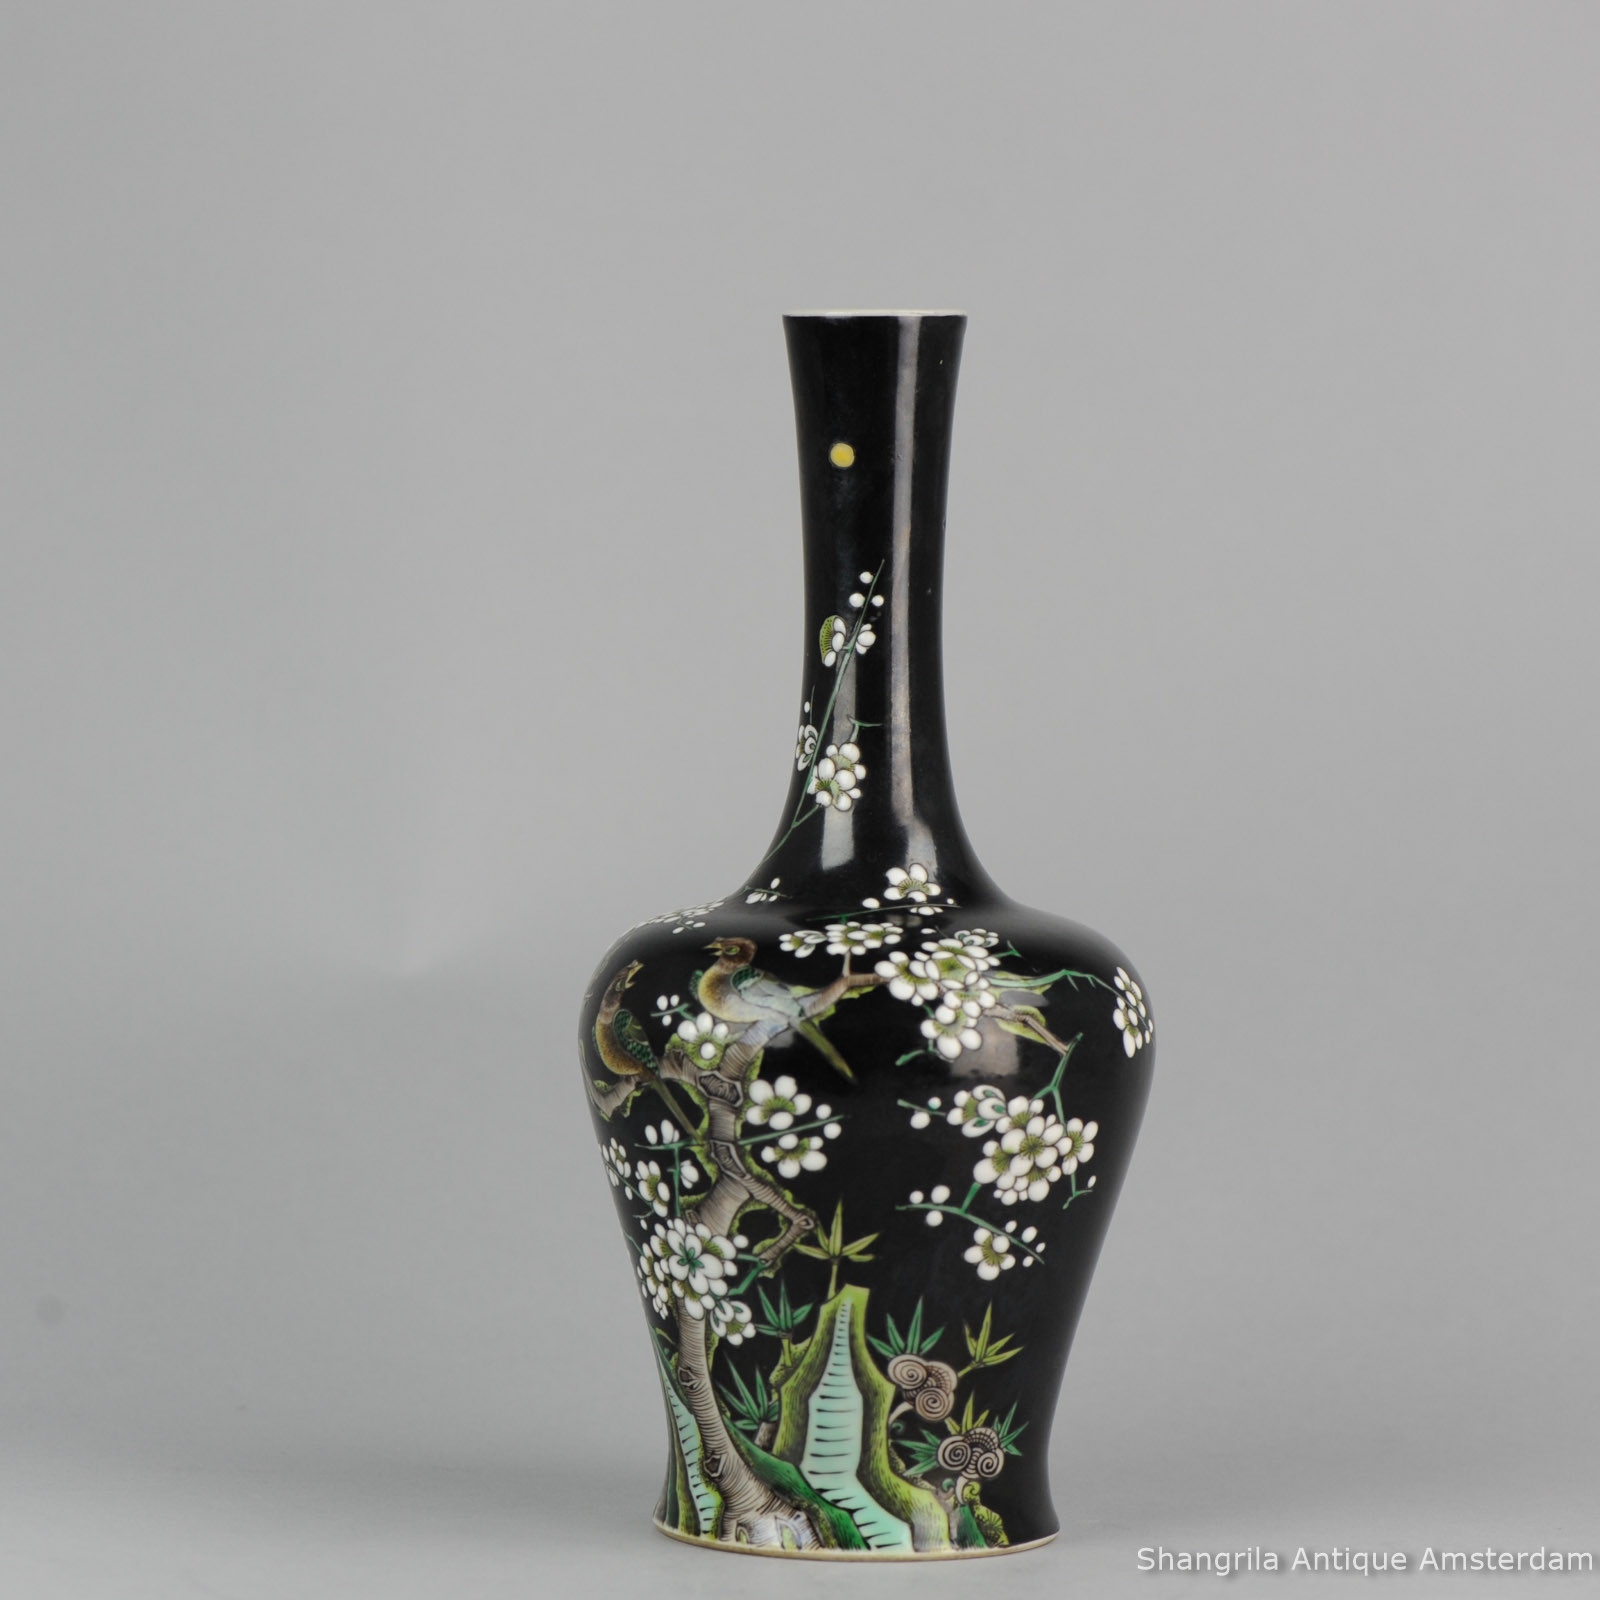 19 Lovely Antique Chinese Glass Vase 2024 free download antique chinese glass vase of shangrila antique with sold